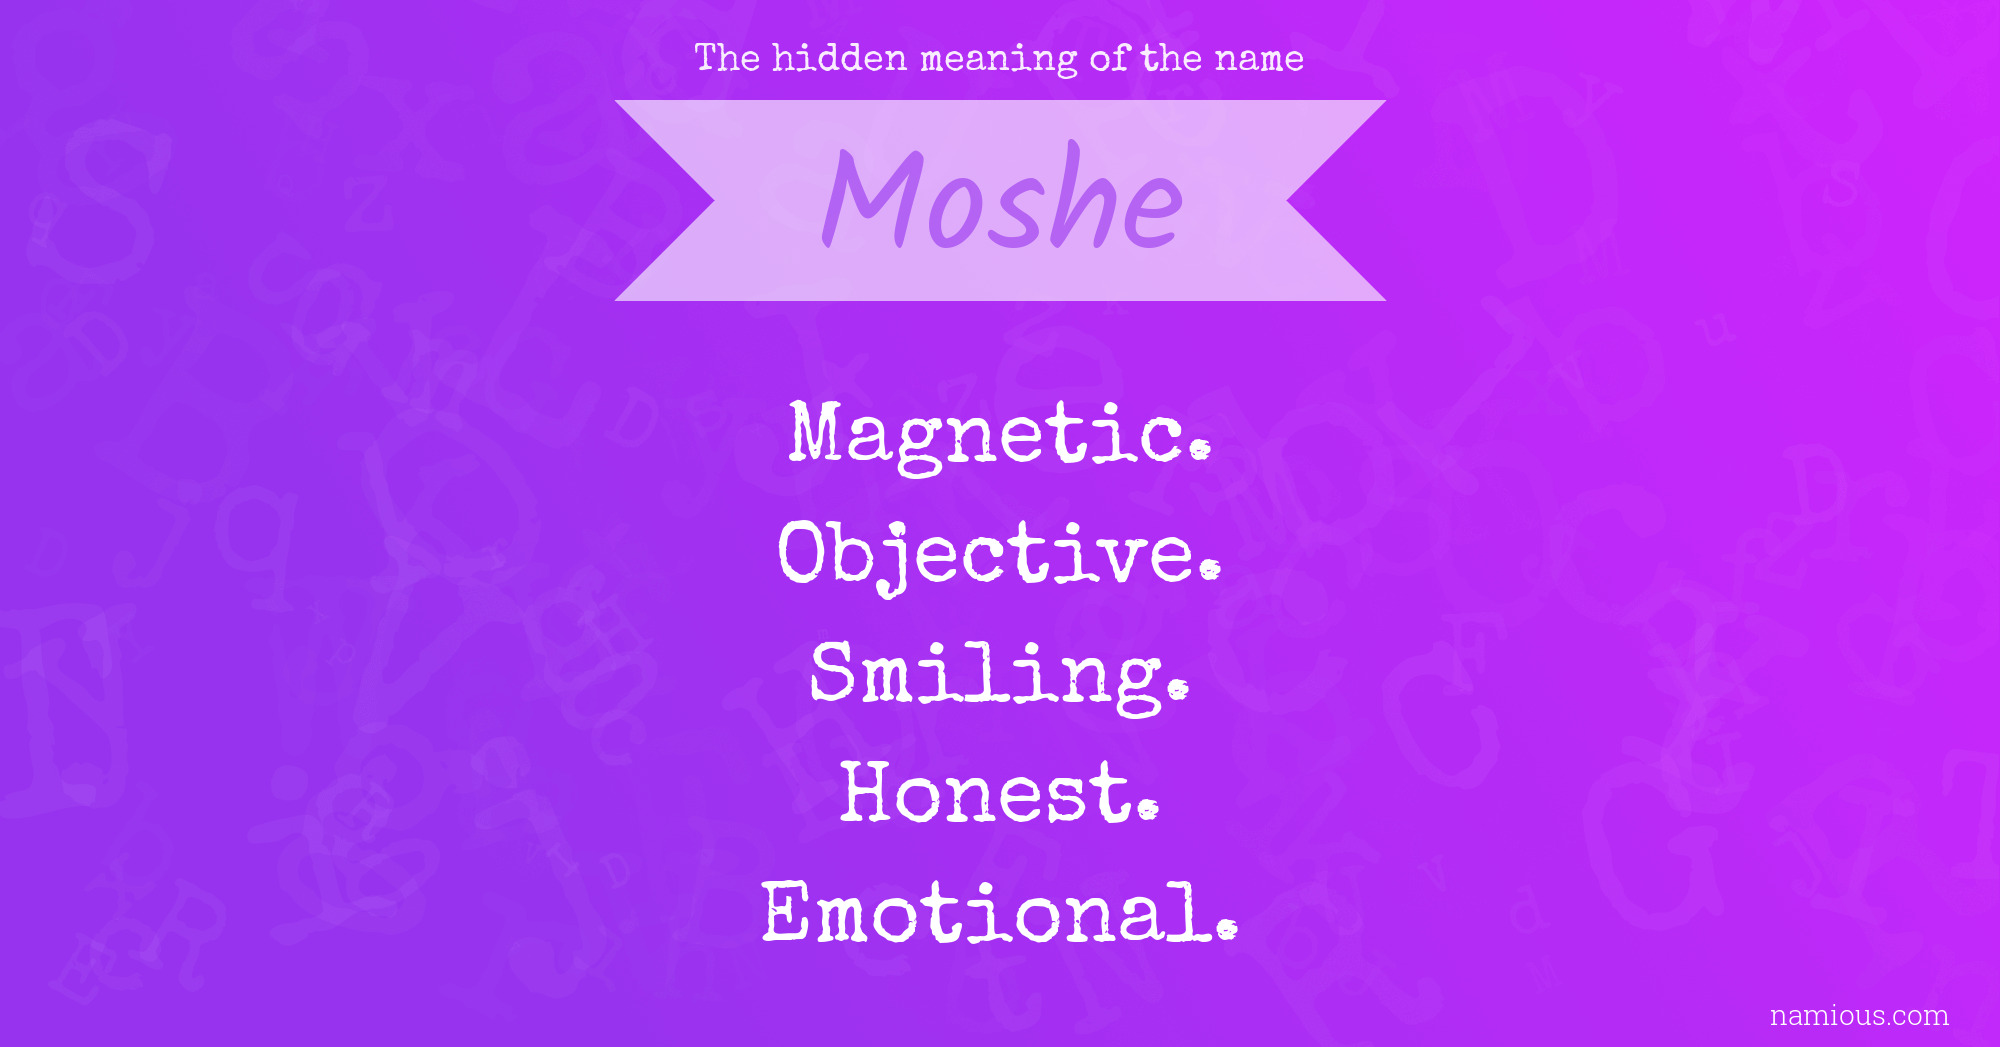 The hidden meaning of the name Moshe